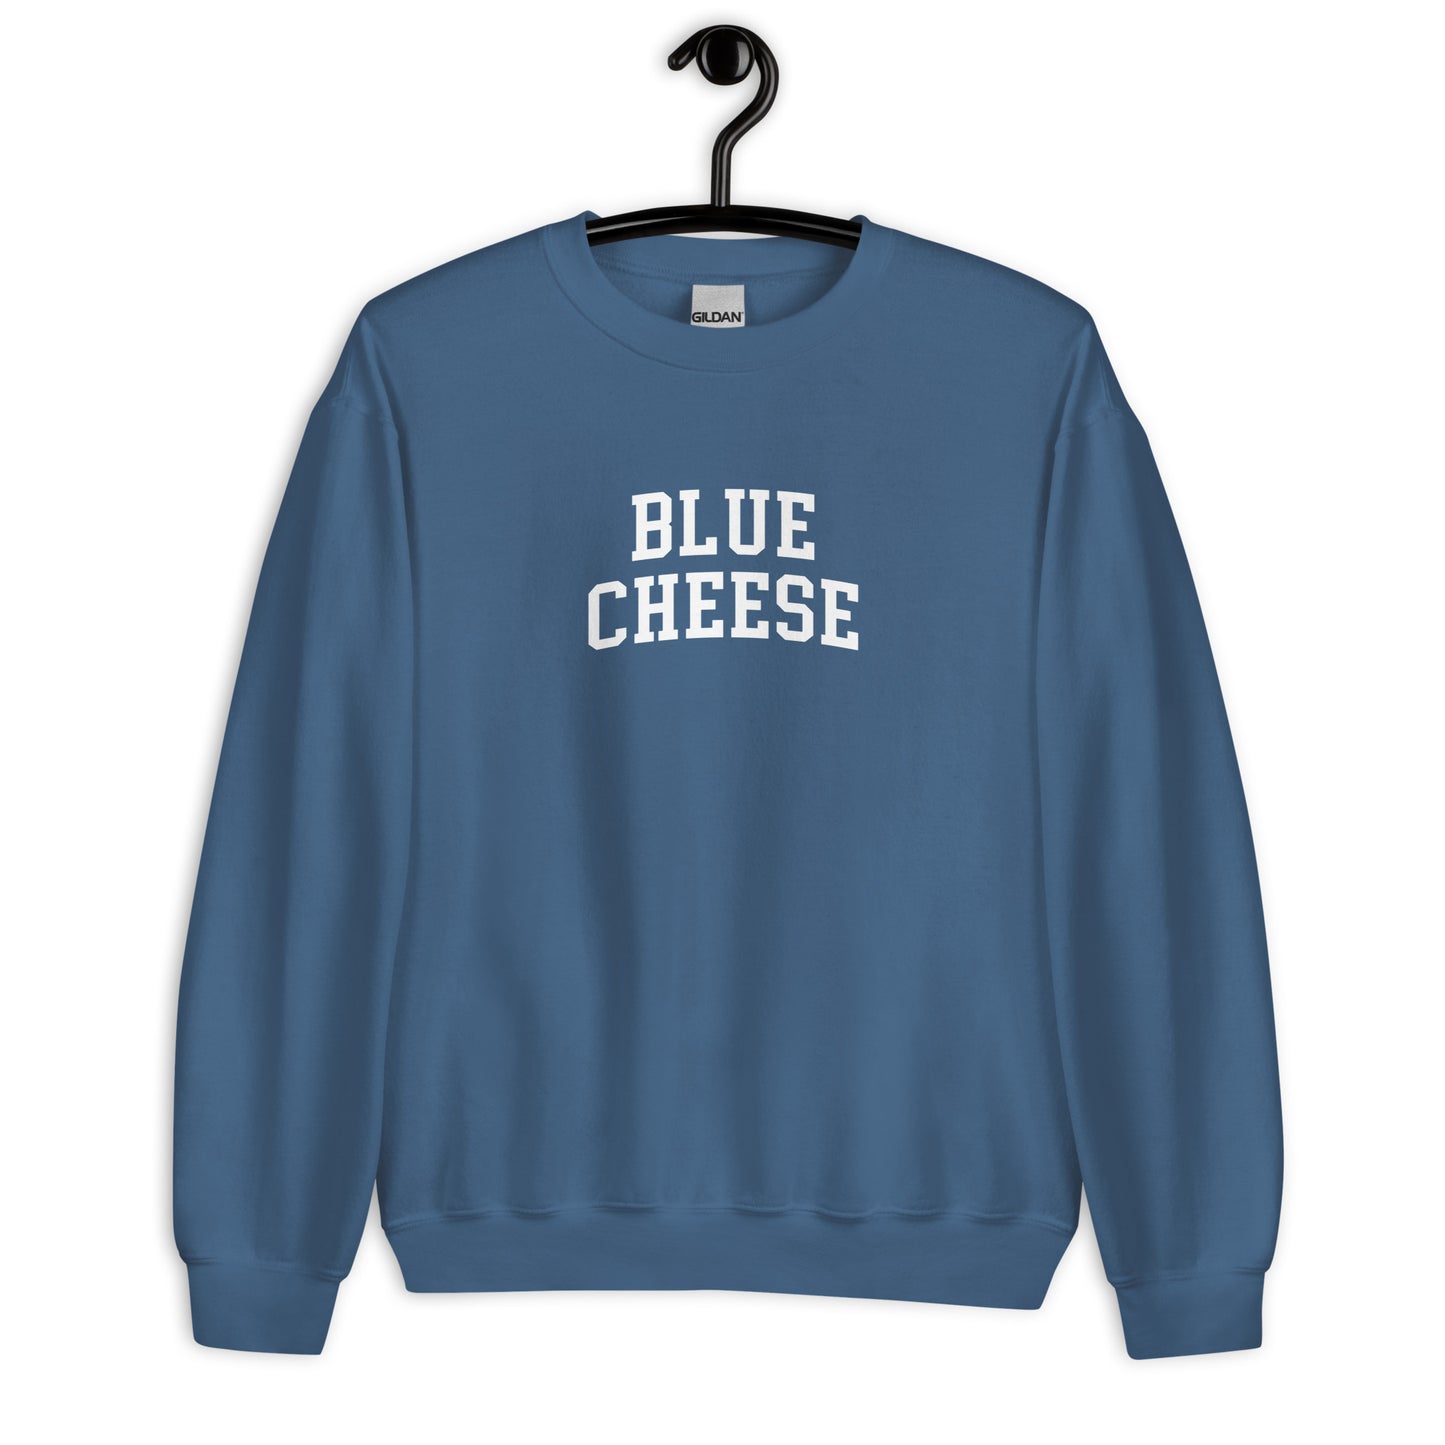 Blue Cheese Sweatshirt - Arched Font